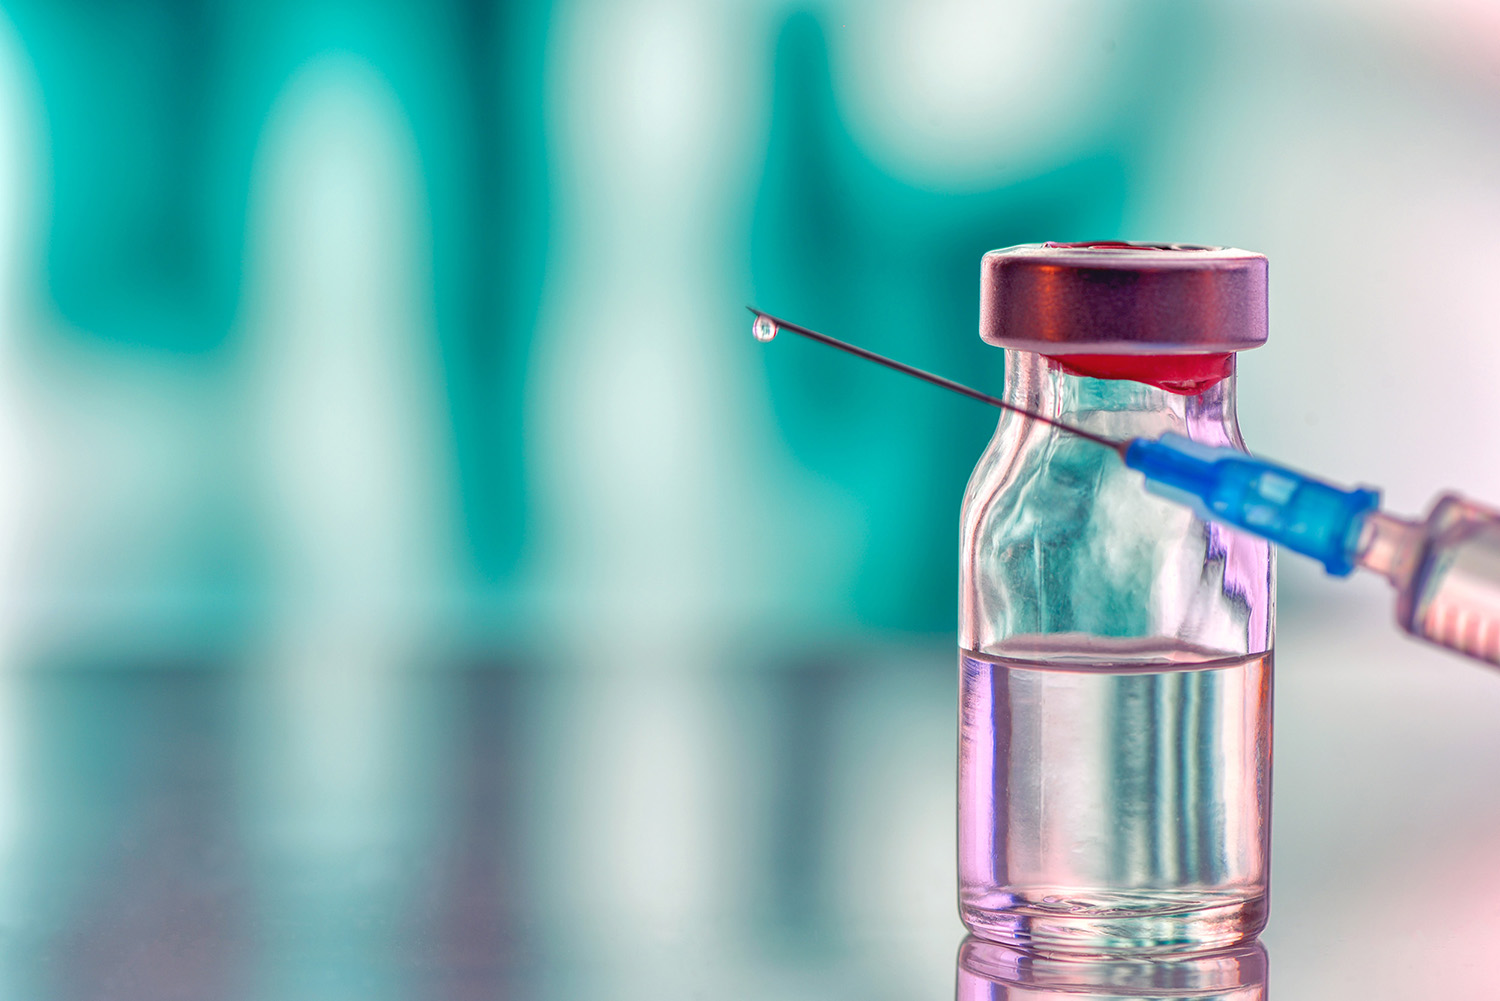 Stock photo of biotherapeutic vial and syringe